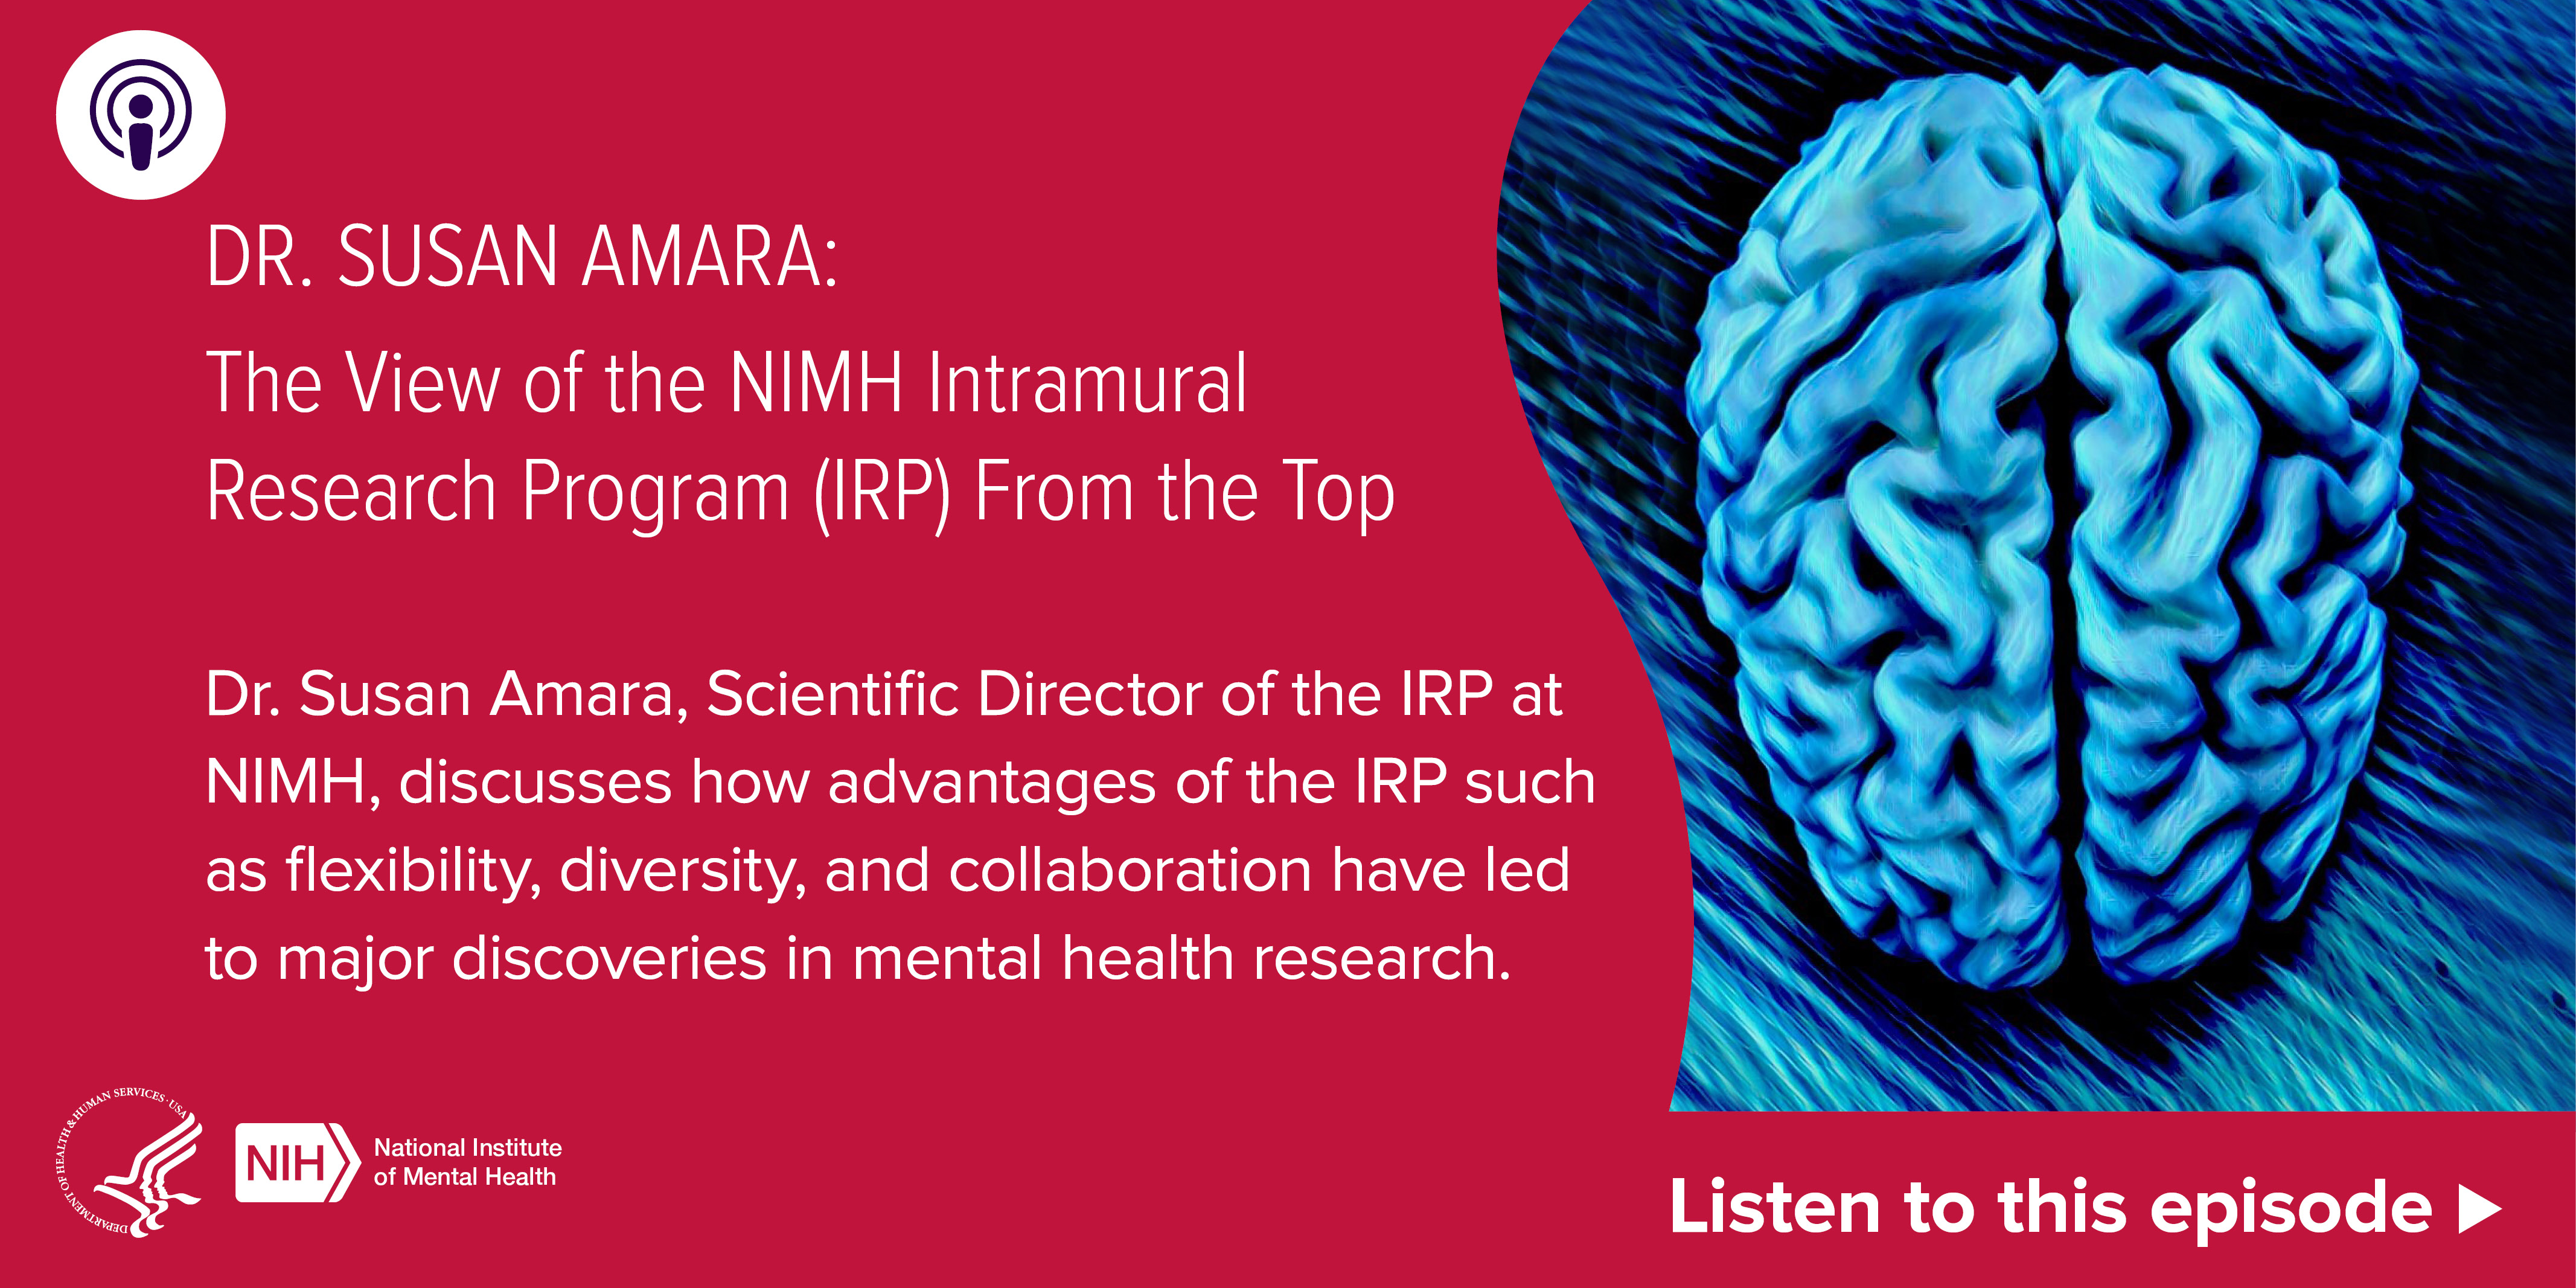 Listen to this episode: Dr. Susan Amara: The View of the NIMH Intramural Research Program (IRP) From the Top. Dr. Susan Amara, Scientific Director of the IRP at NIMH, discusses how advantages of the IRP such as flexibility, diversity, and collaboration have led to major discoveries in mental health research. A blue brain graphic on a red background. HHS NIMH logo. 